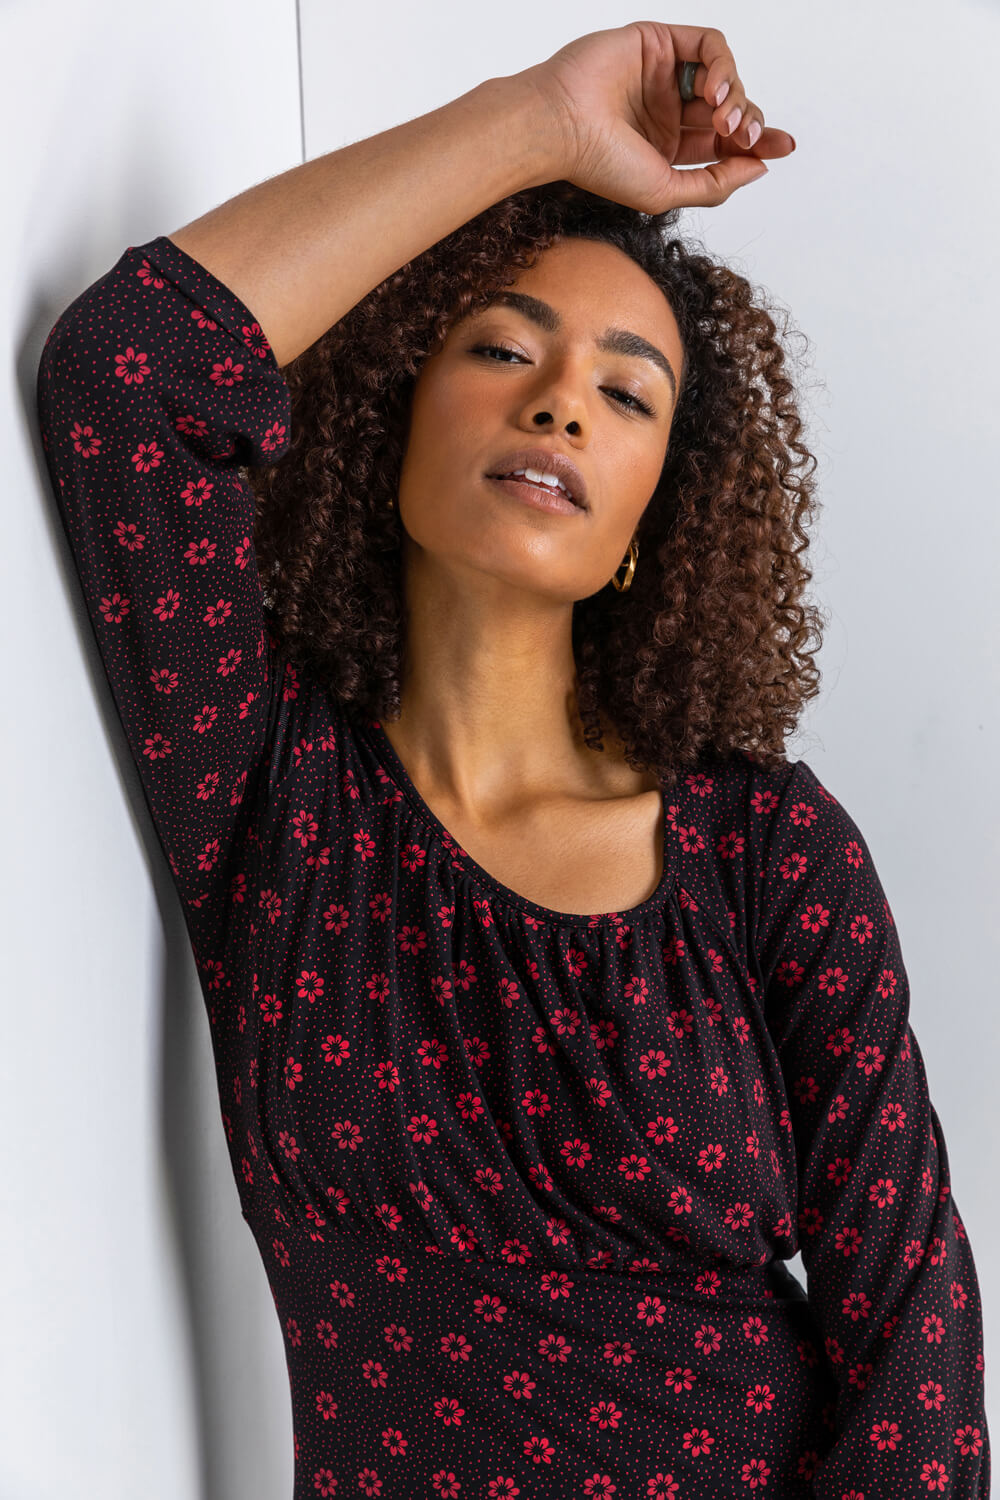 Red Square Neck Floral Spot Print Dress, Image 4 of 5